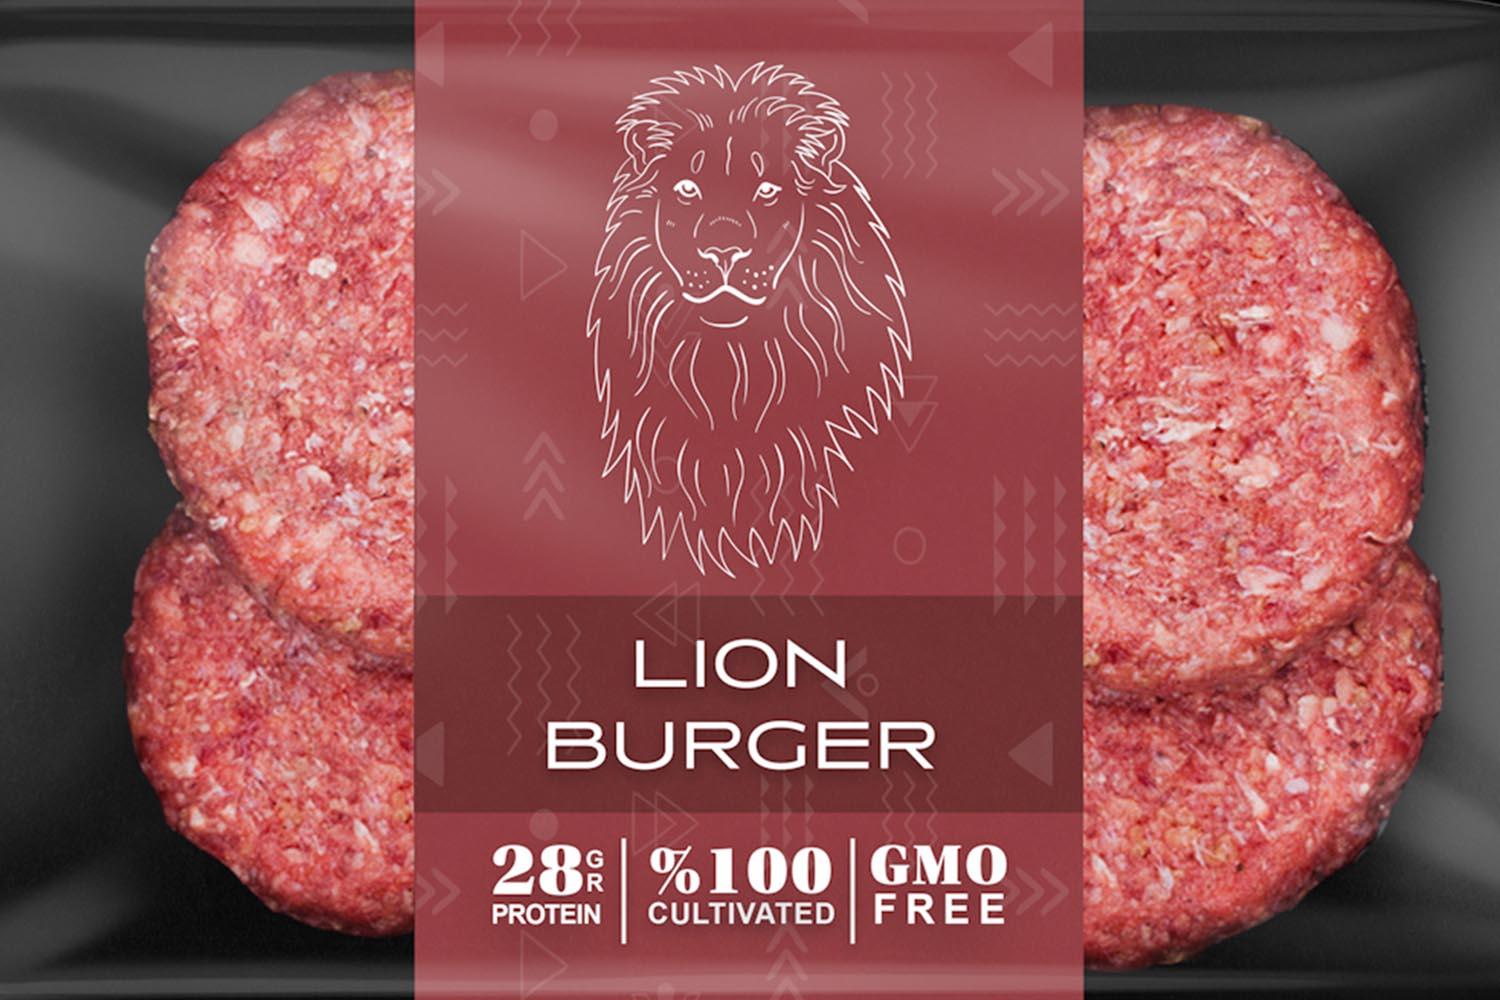 world-first-lab-grown-lion-meat-as-climate-friendly-cultivated-food-SPACEBAR-Hero.jpg